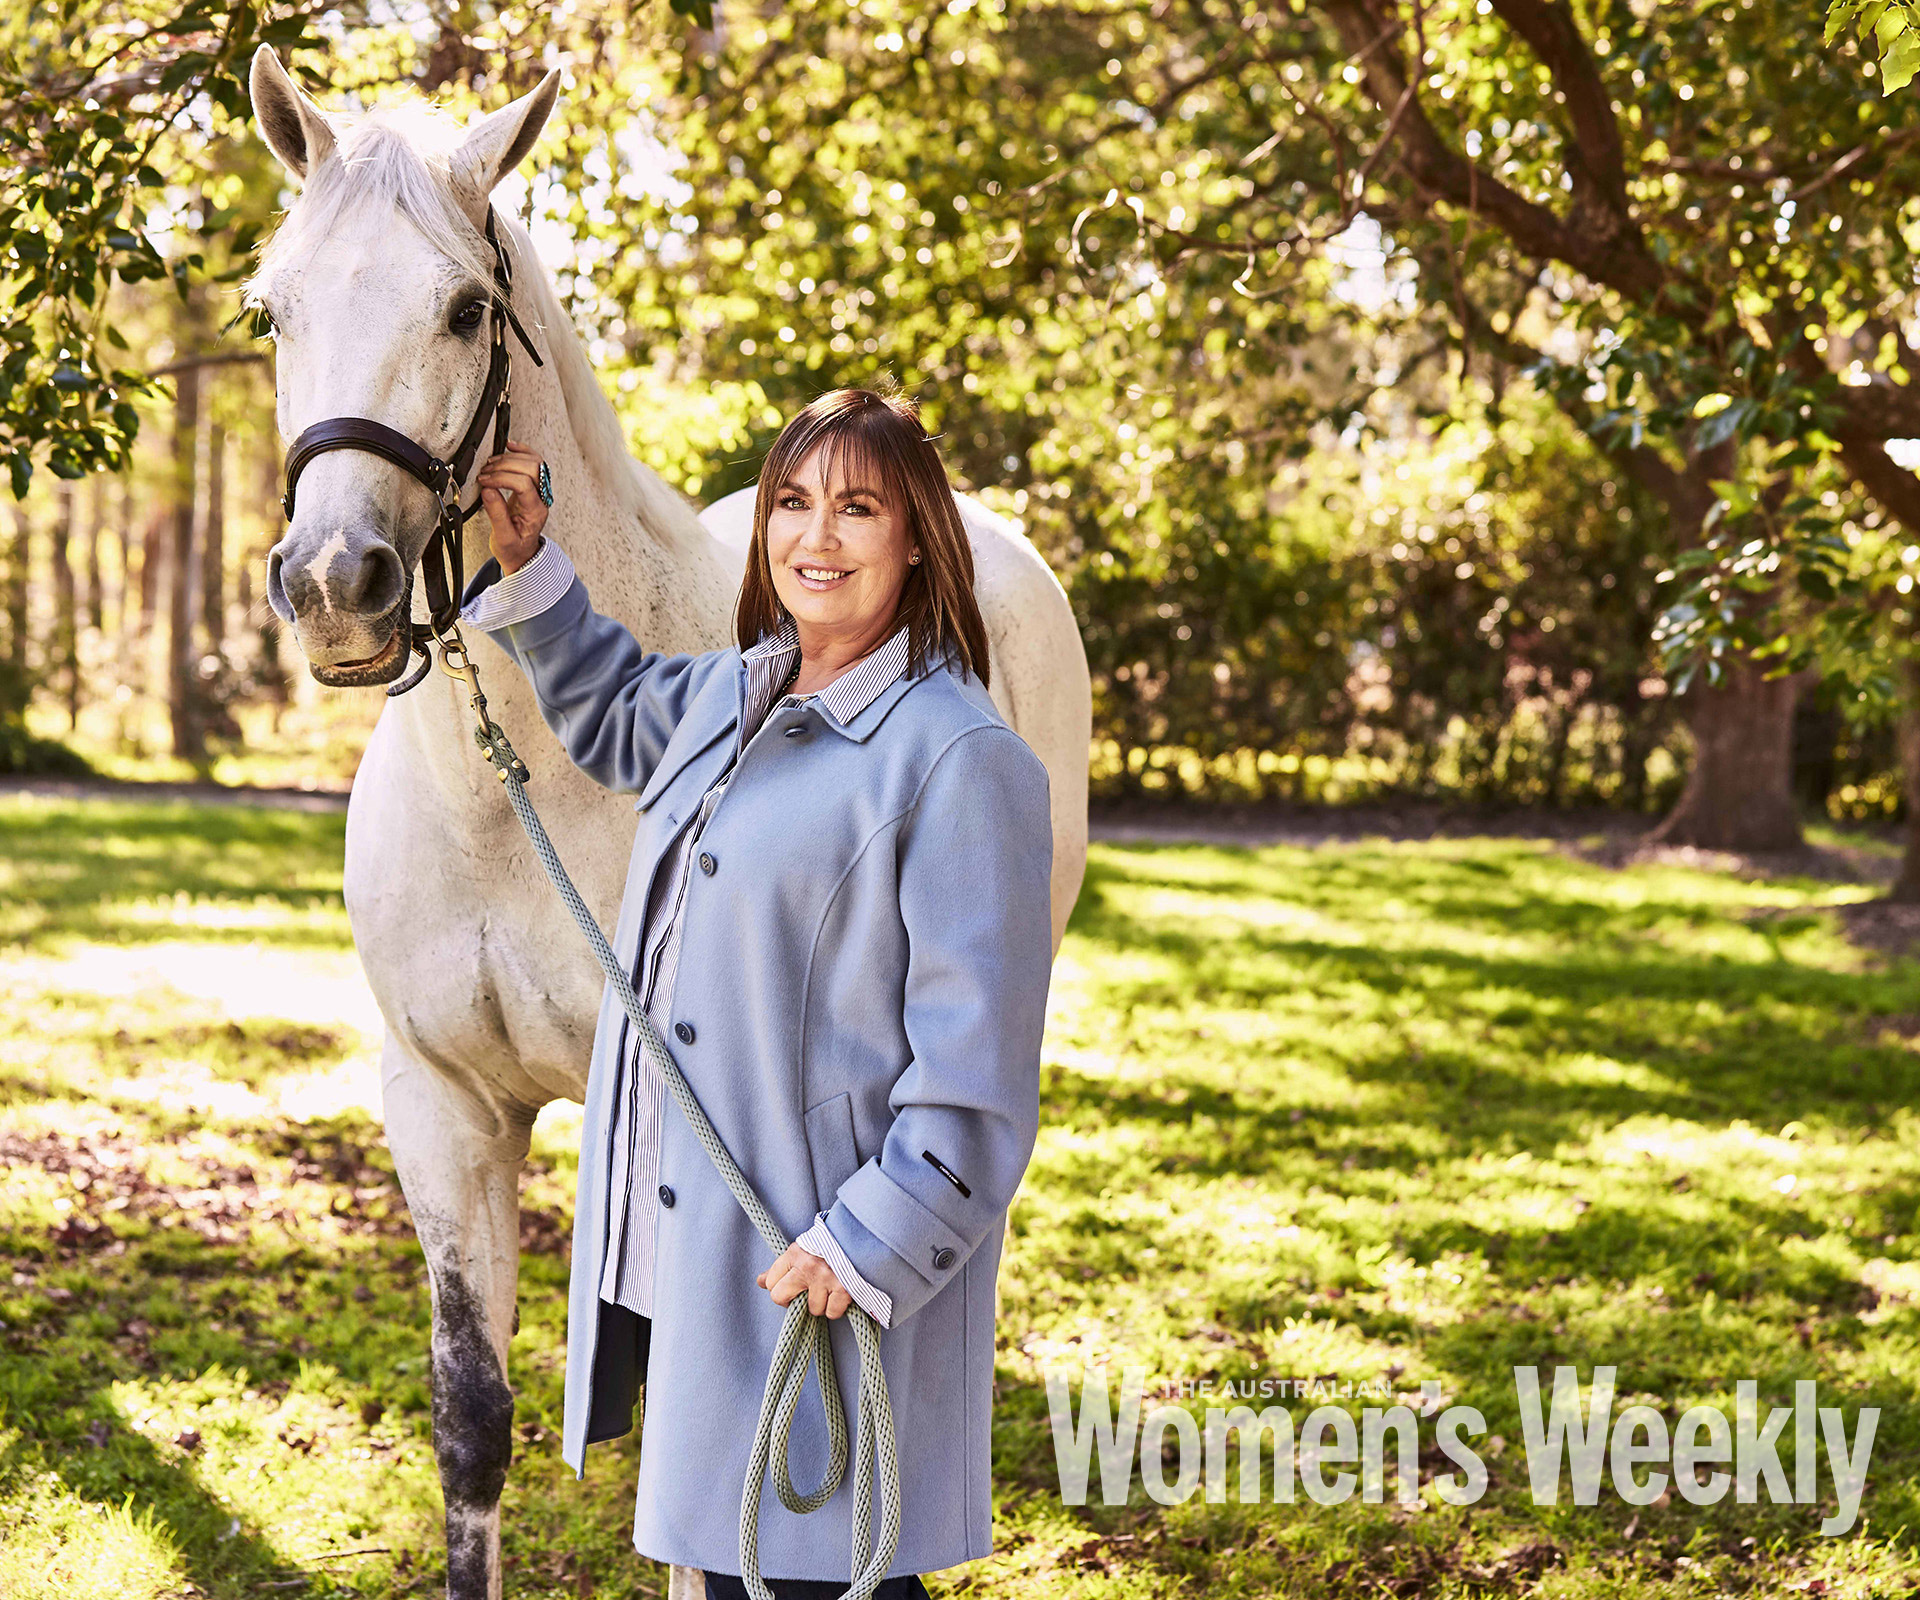 EXCLUSIVE: Tracy Grimshaw tells The Australian Women’s Weekly – “I’m not crippled by shyness”